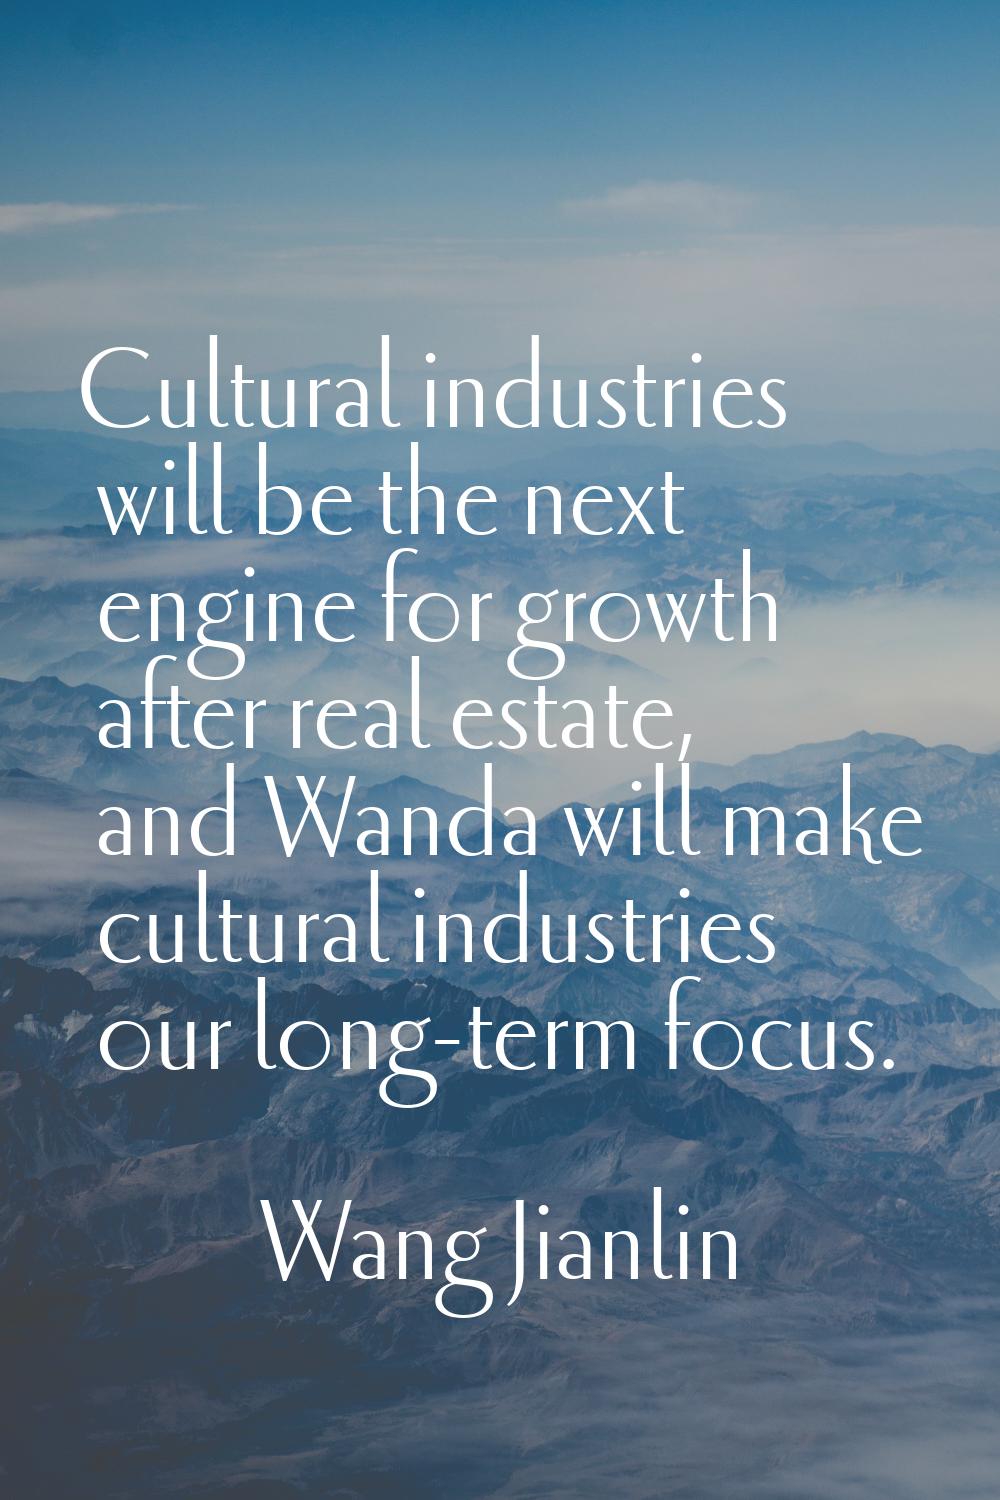 Cultural industries will be the next engine for growth after real estate, and Wanda will make cultu